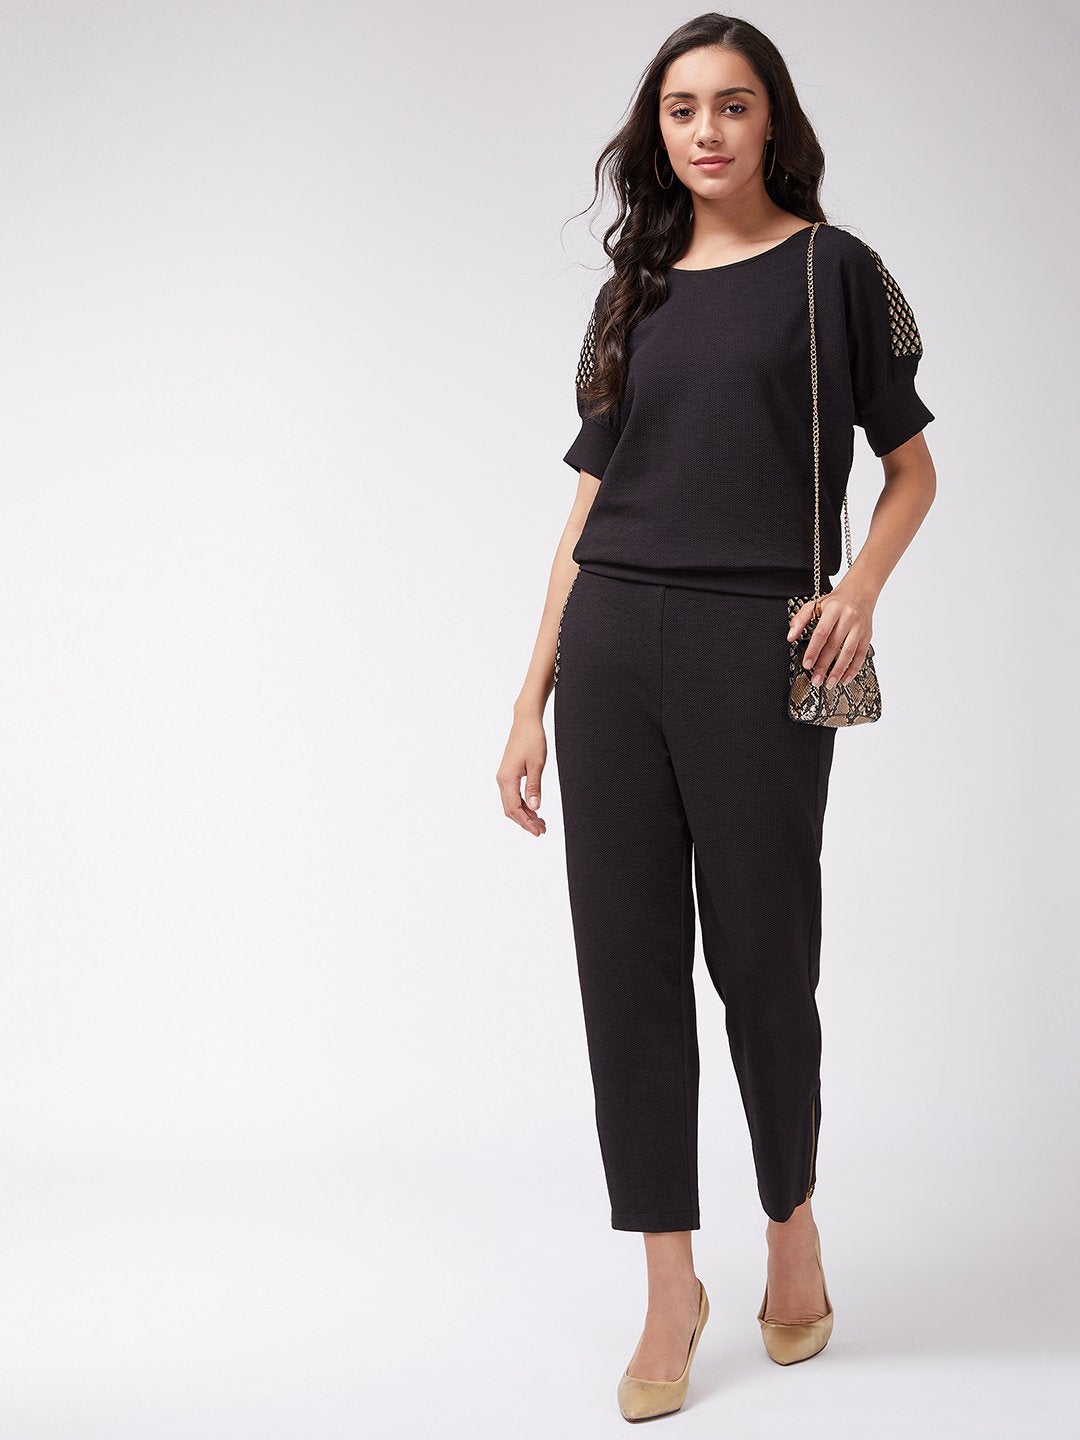 Women's Solid Loose Top And Jogger Pants With Embellished Patch - Pannkh